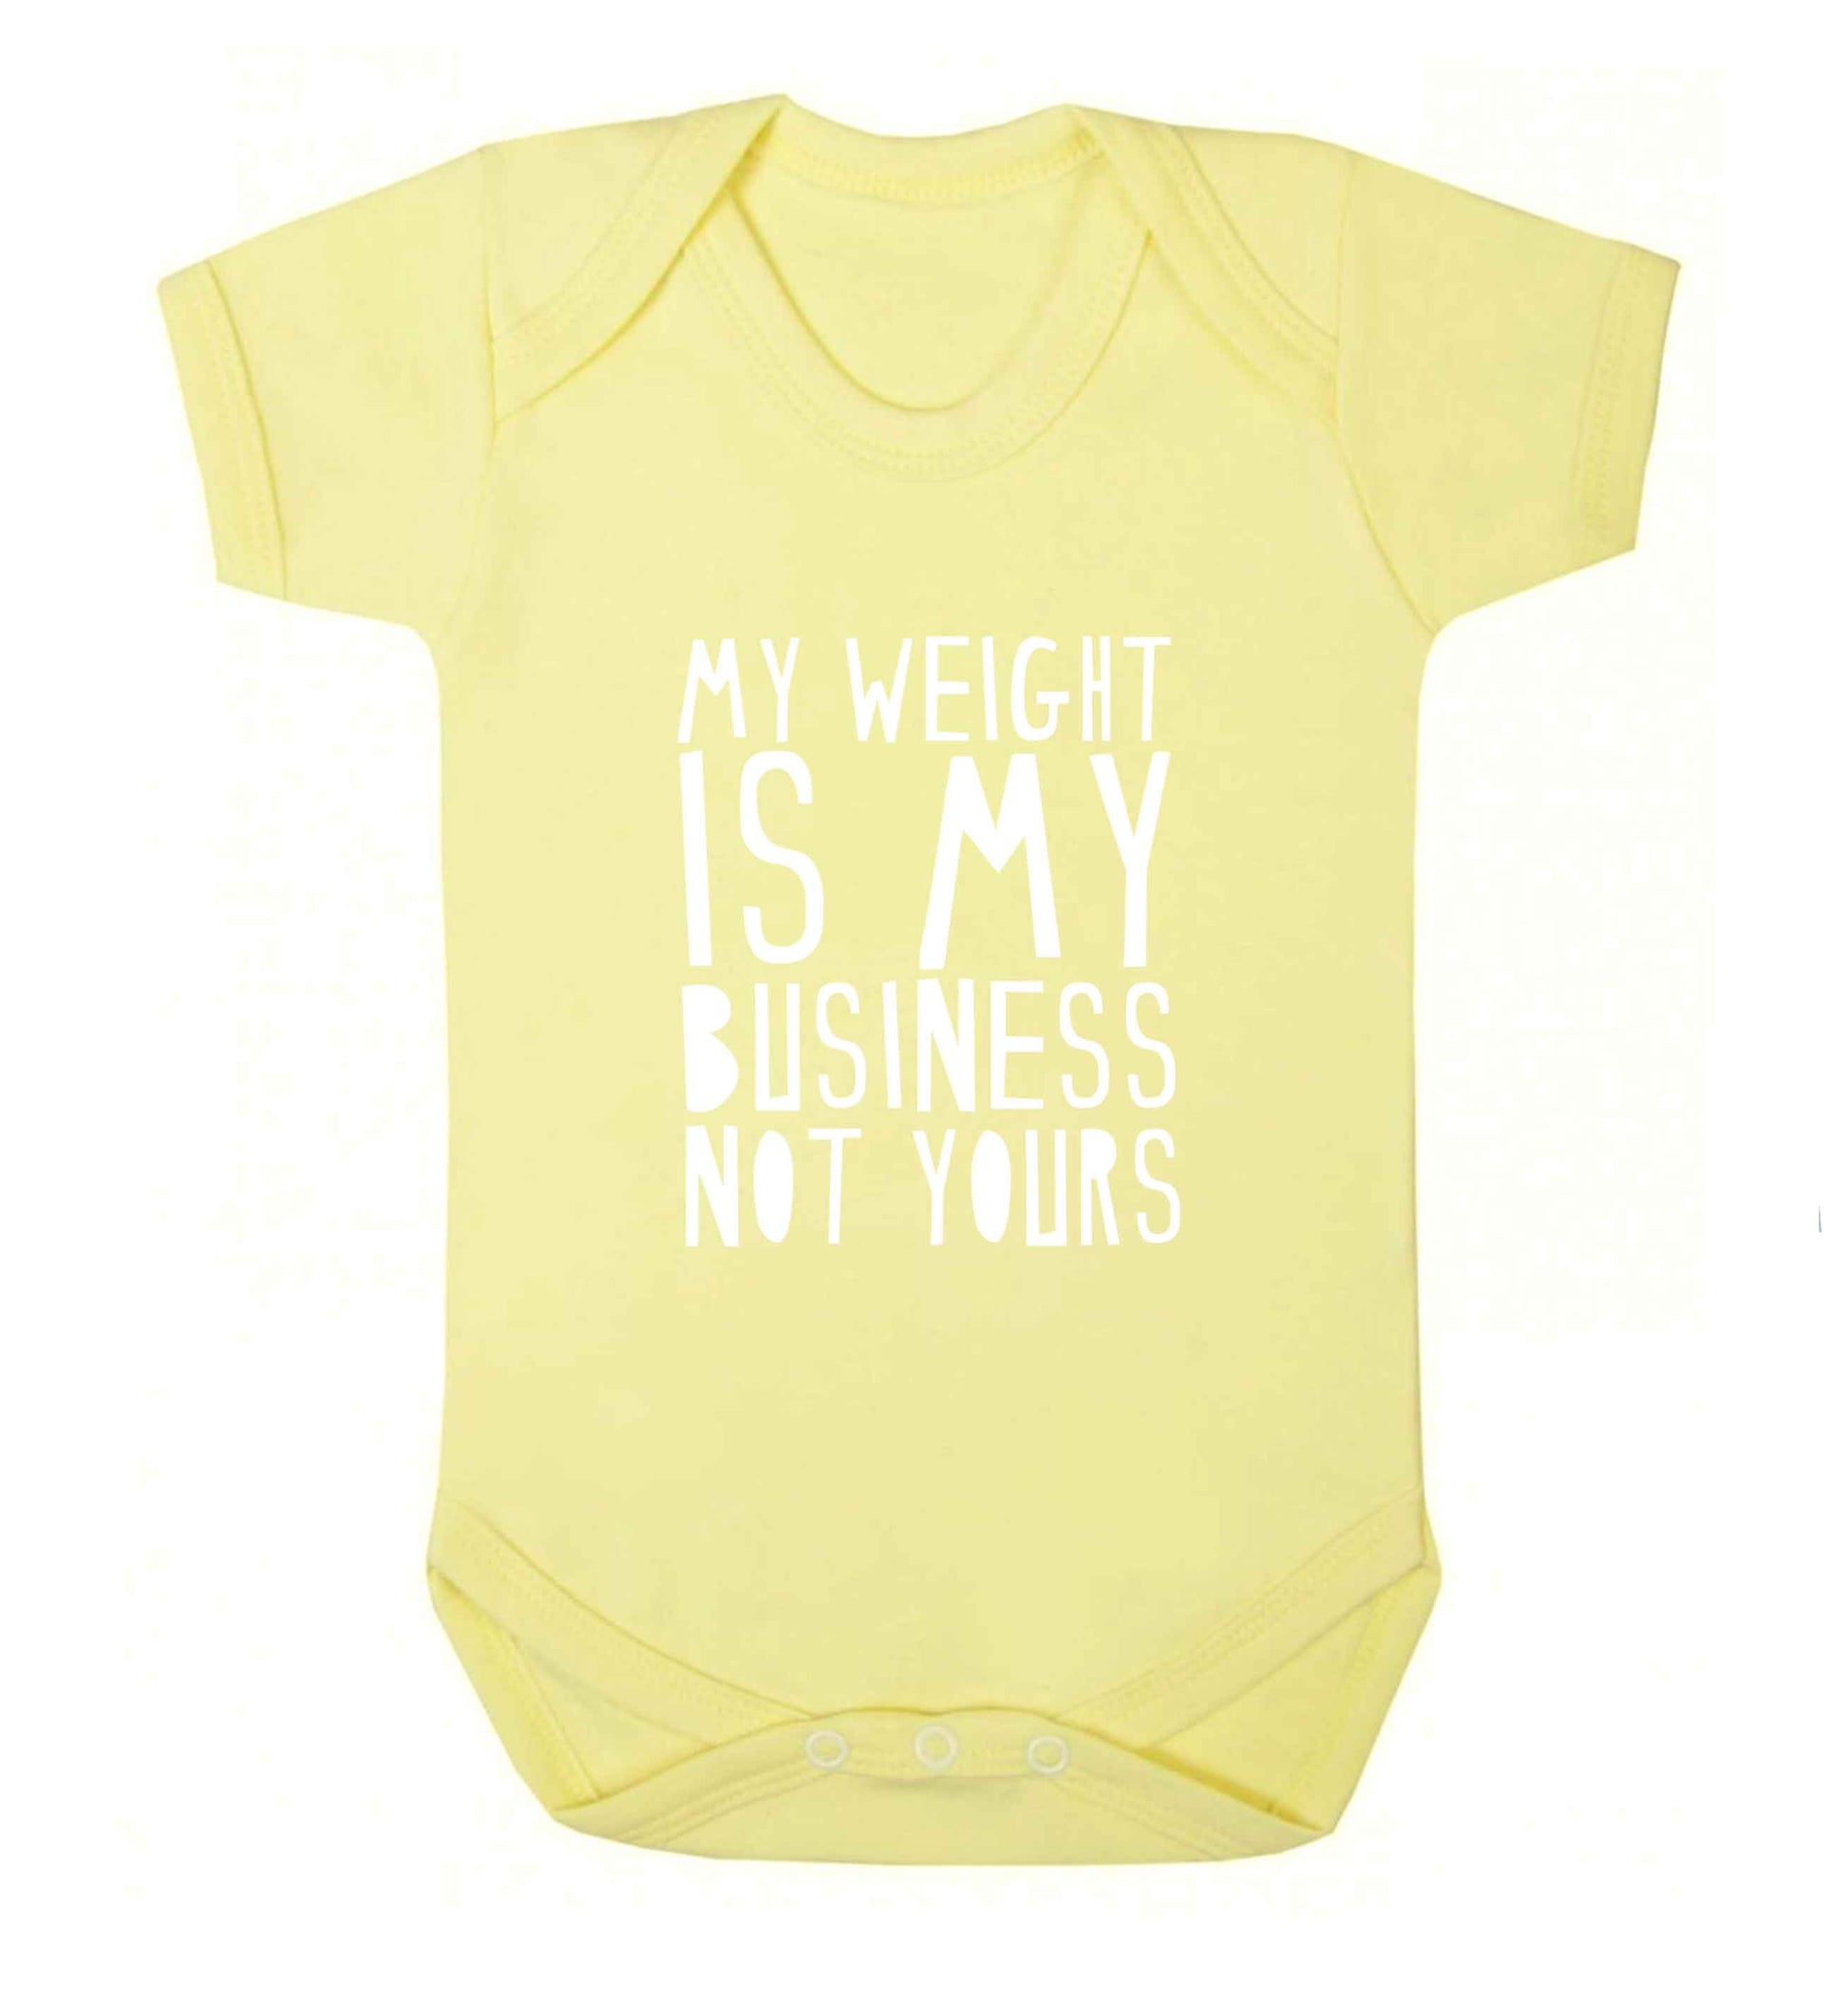 My weight is my business not yours baby vest pale yellow 18-24 months